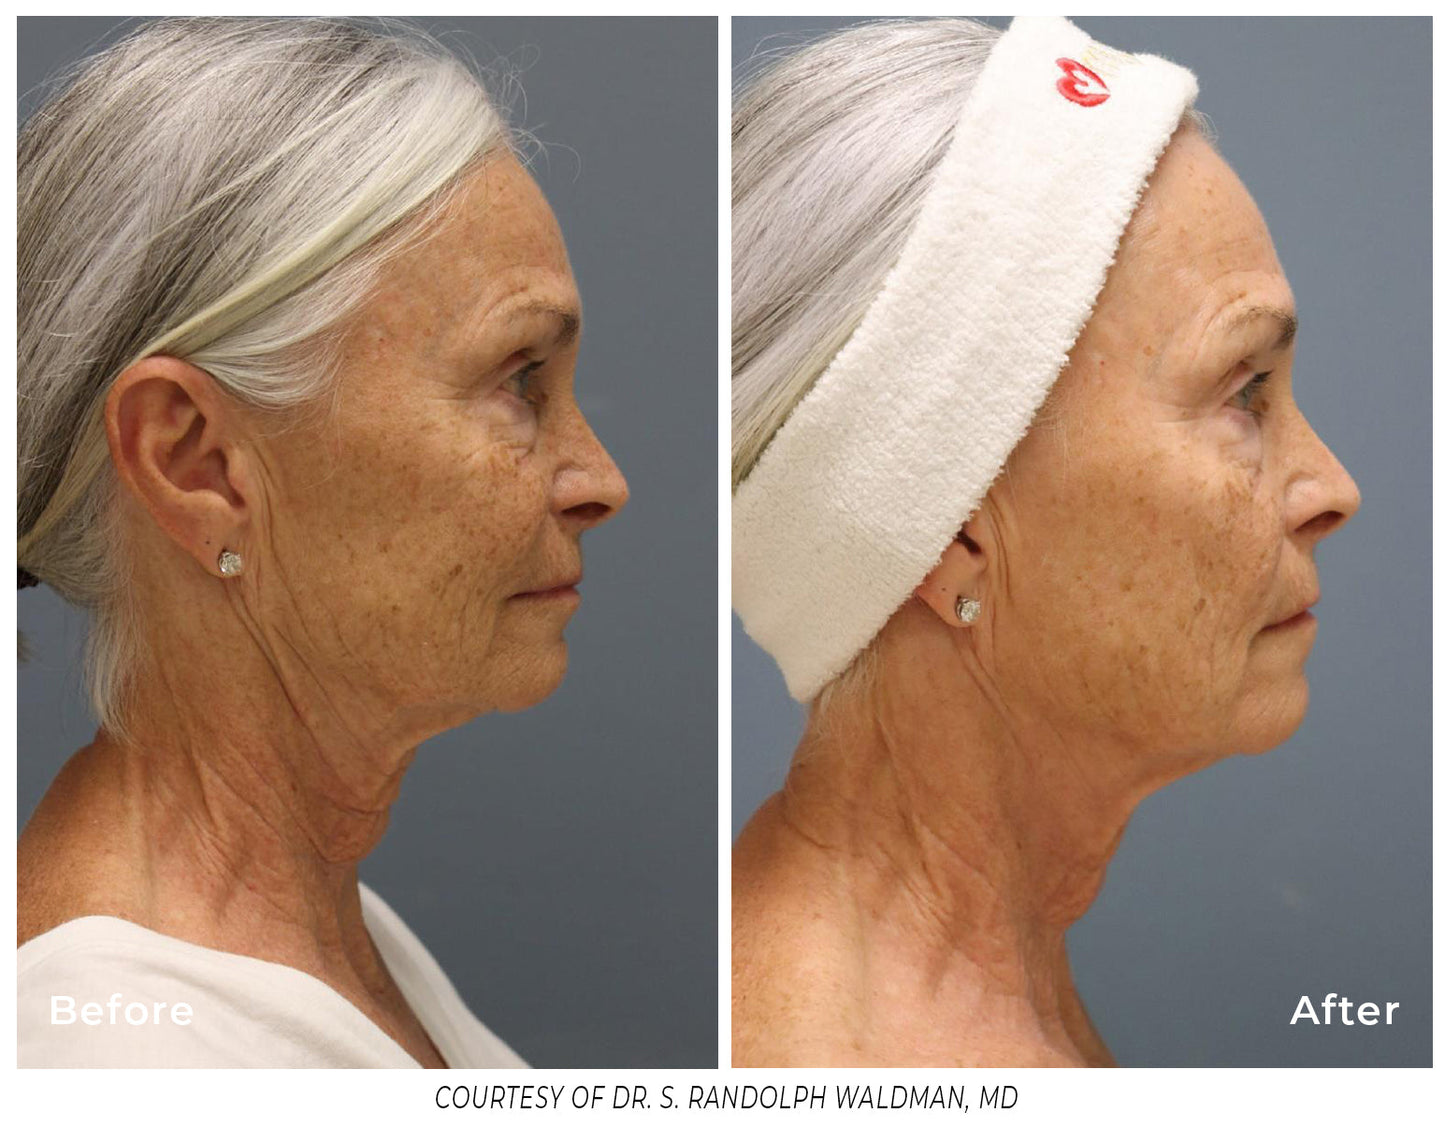 Pixel8 RF Microneeling - Buy 1 RF Microneedling Treatment for Face and Receive Neck for FREE